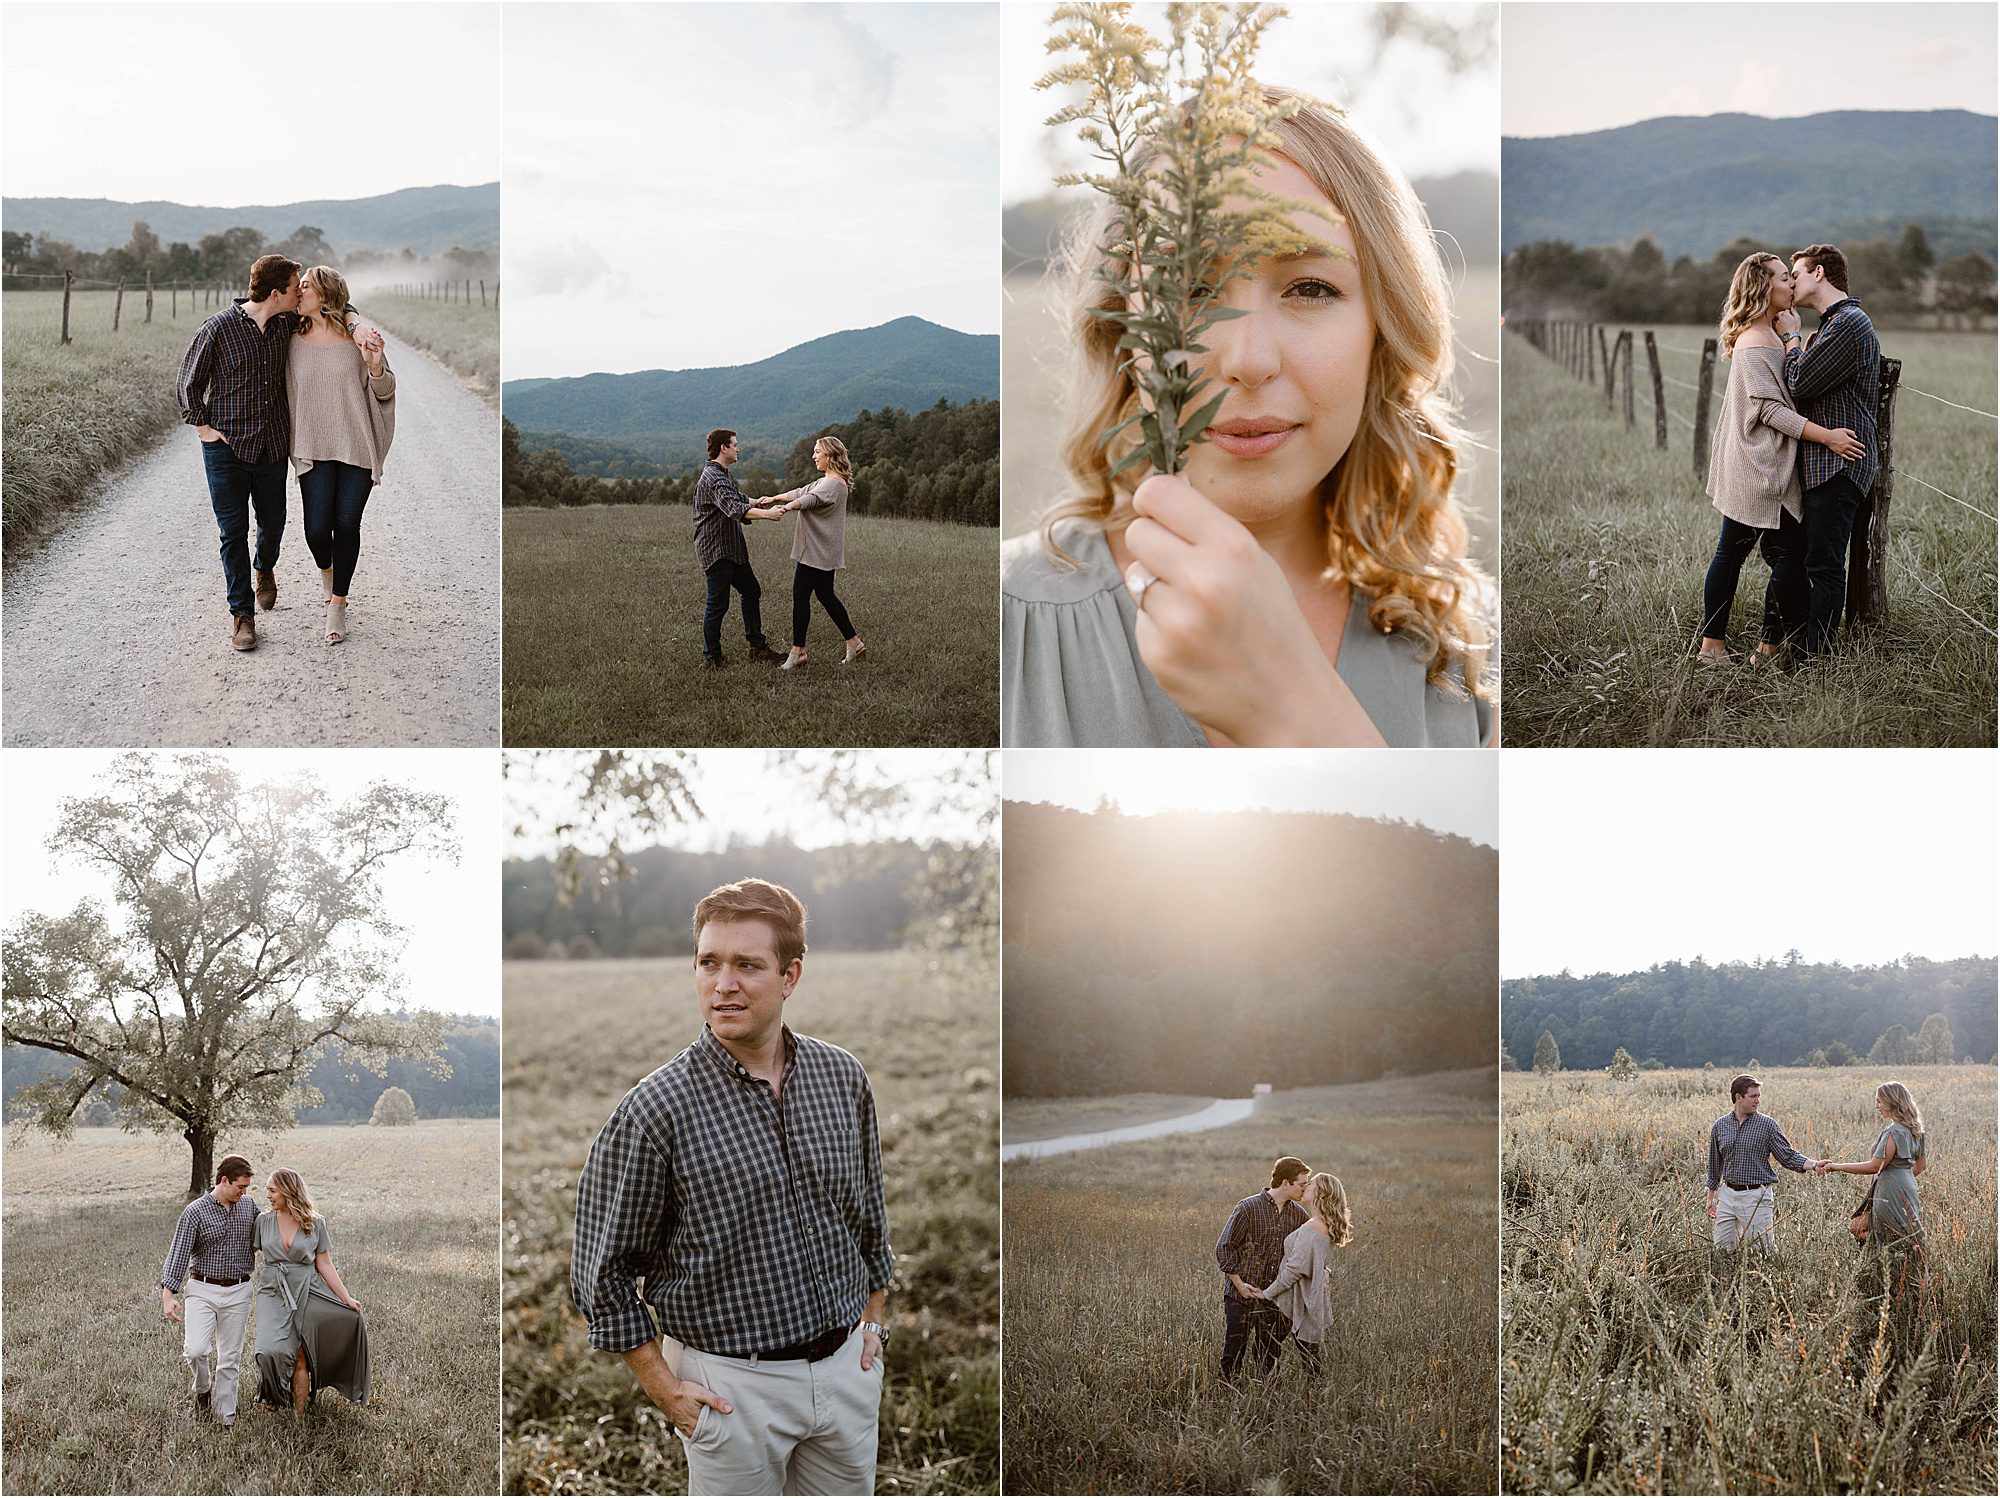 Summer Engagement Photos in Cades Cove